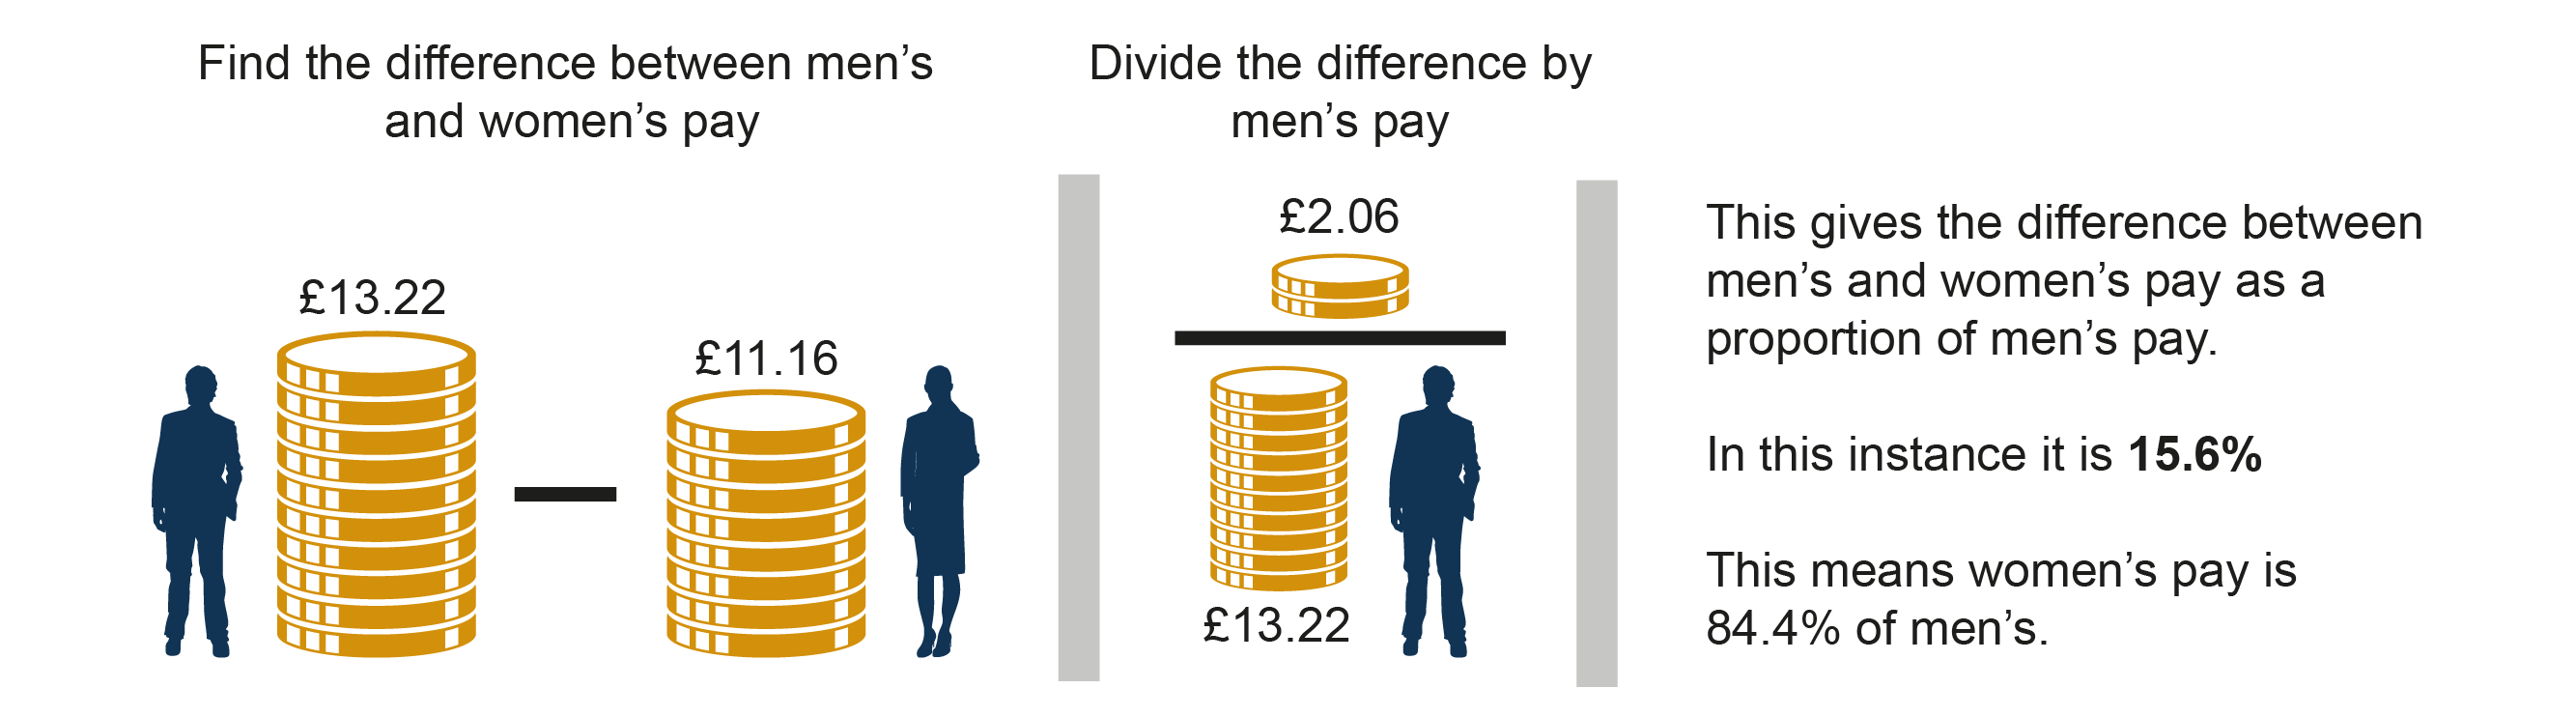 How the gender pay gap is calculated